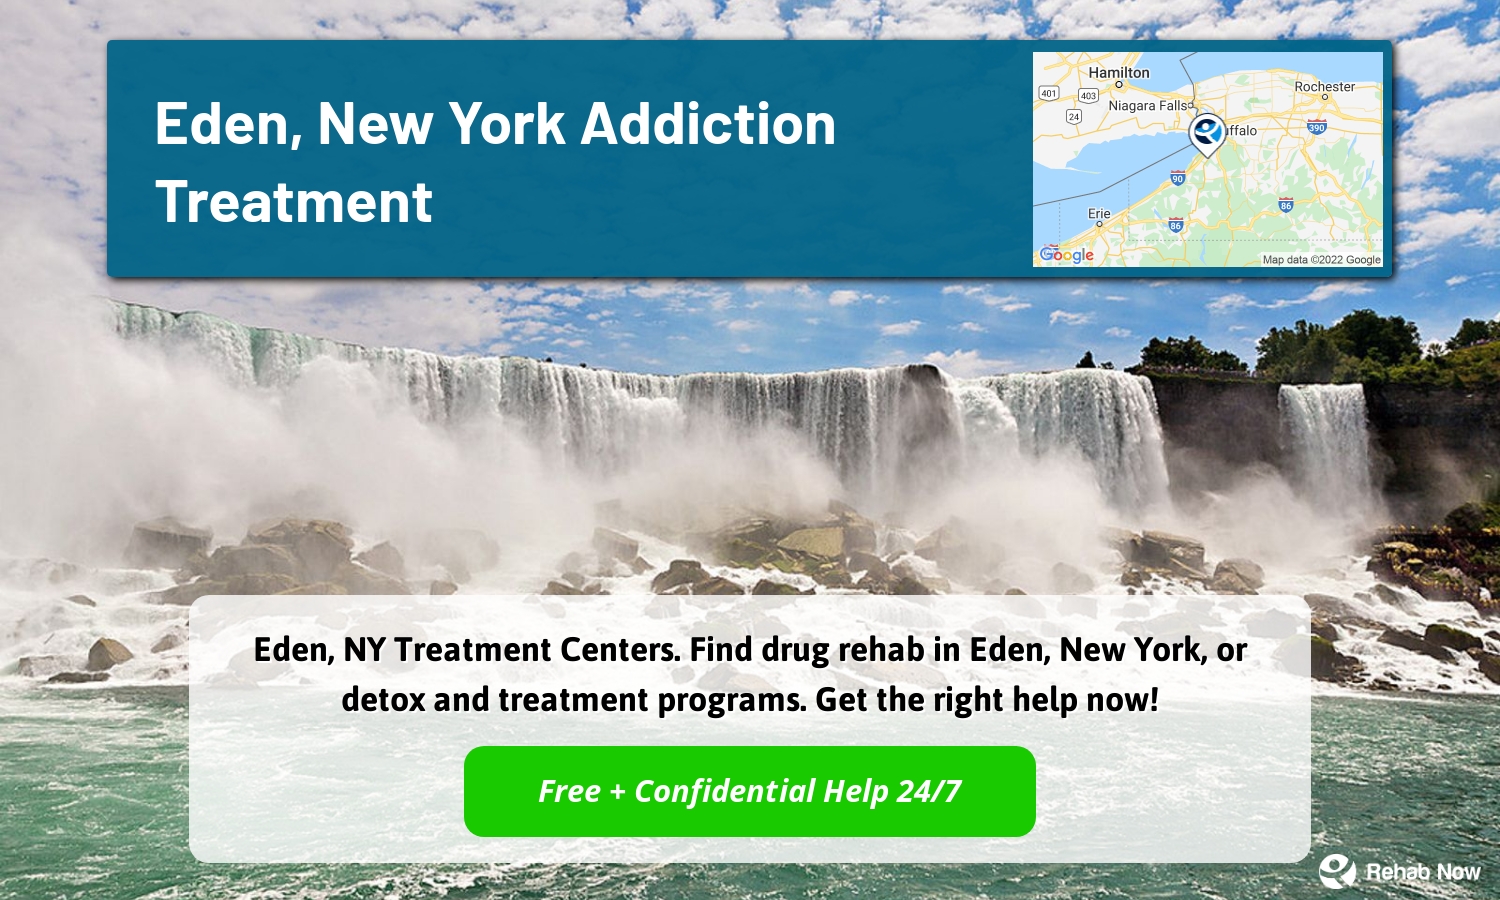 Eden, NY Treatment Centers. Find drug rehab in Eden, New York, or detox and treatment programs. Get the right help now!